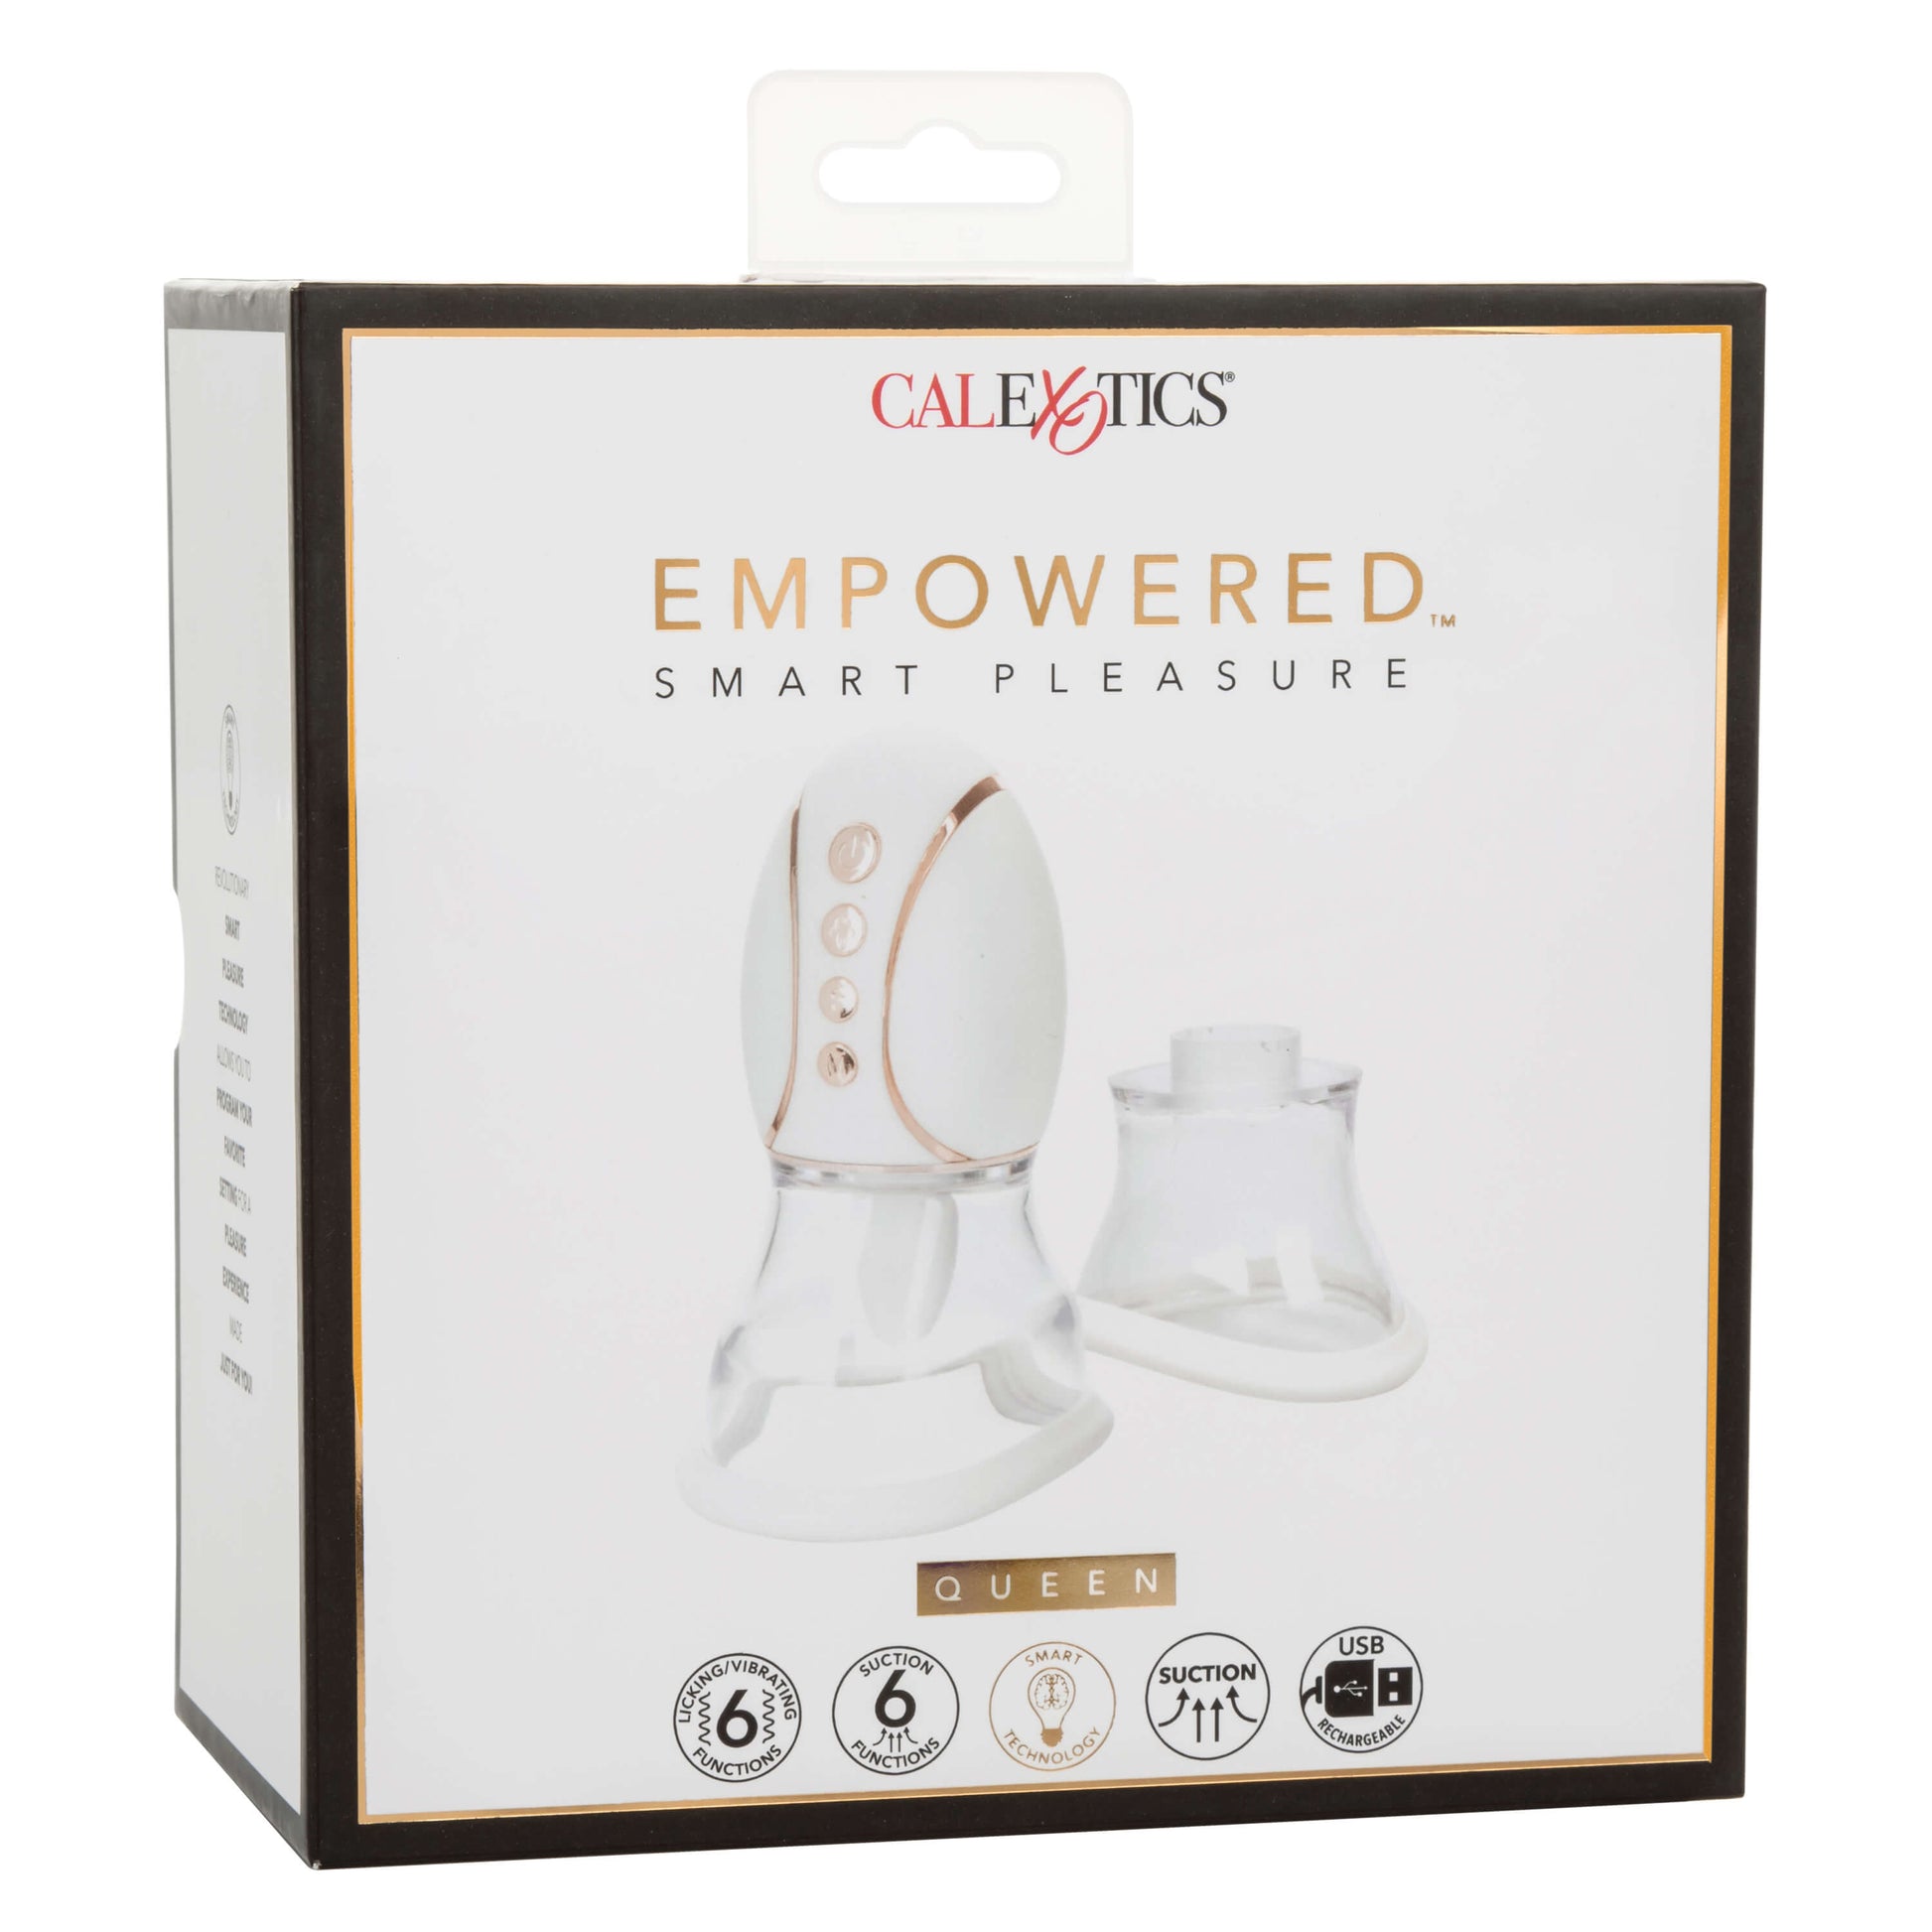 Package of the Empowered Smart Pleasure Queen - CalExotics - The Bigger O online sex toy shop USA, Canada & UK shipping available